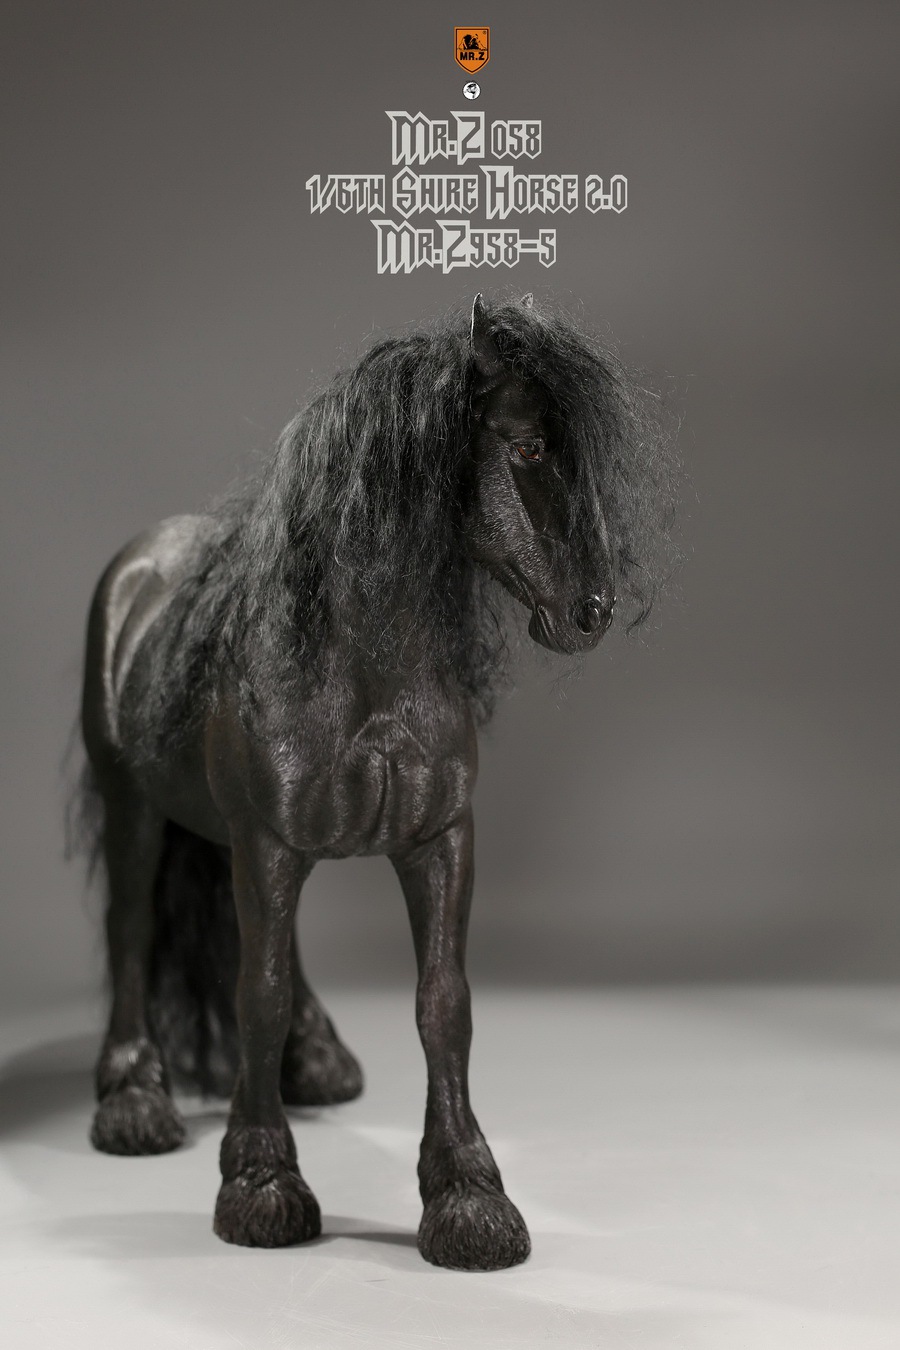 Mr - NEW PRODUCT: MR. Z: 58th round-Shire Horse 2.0 version full set of 5 colors  08575812